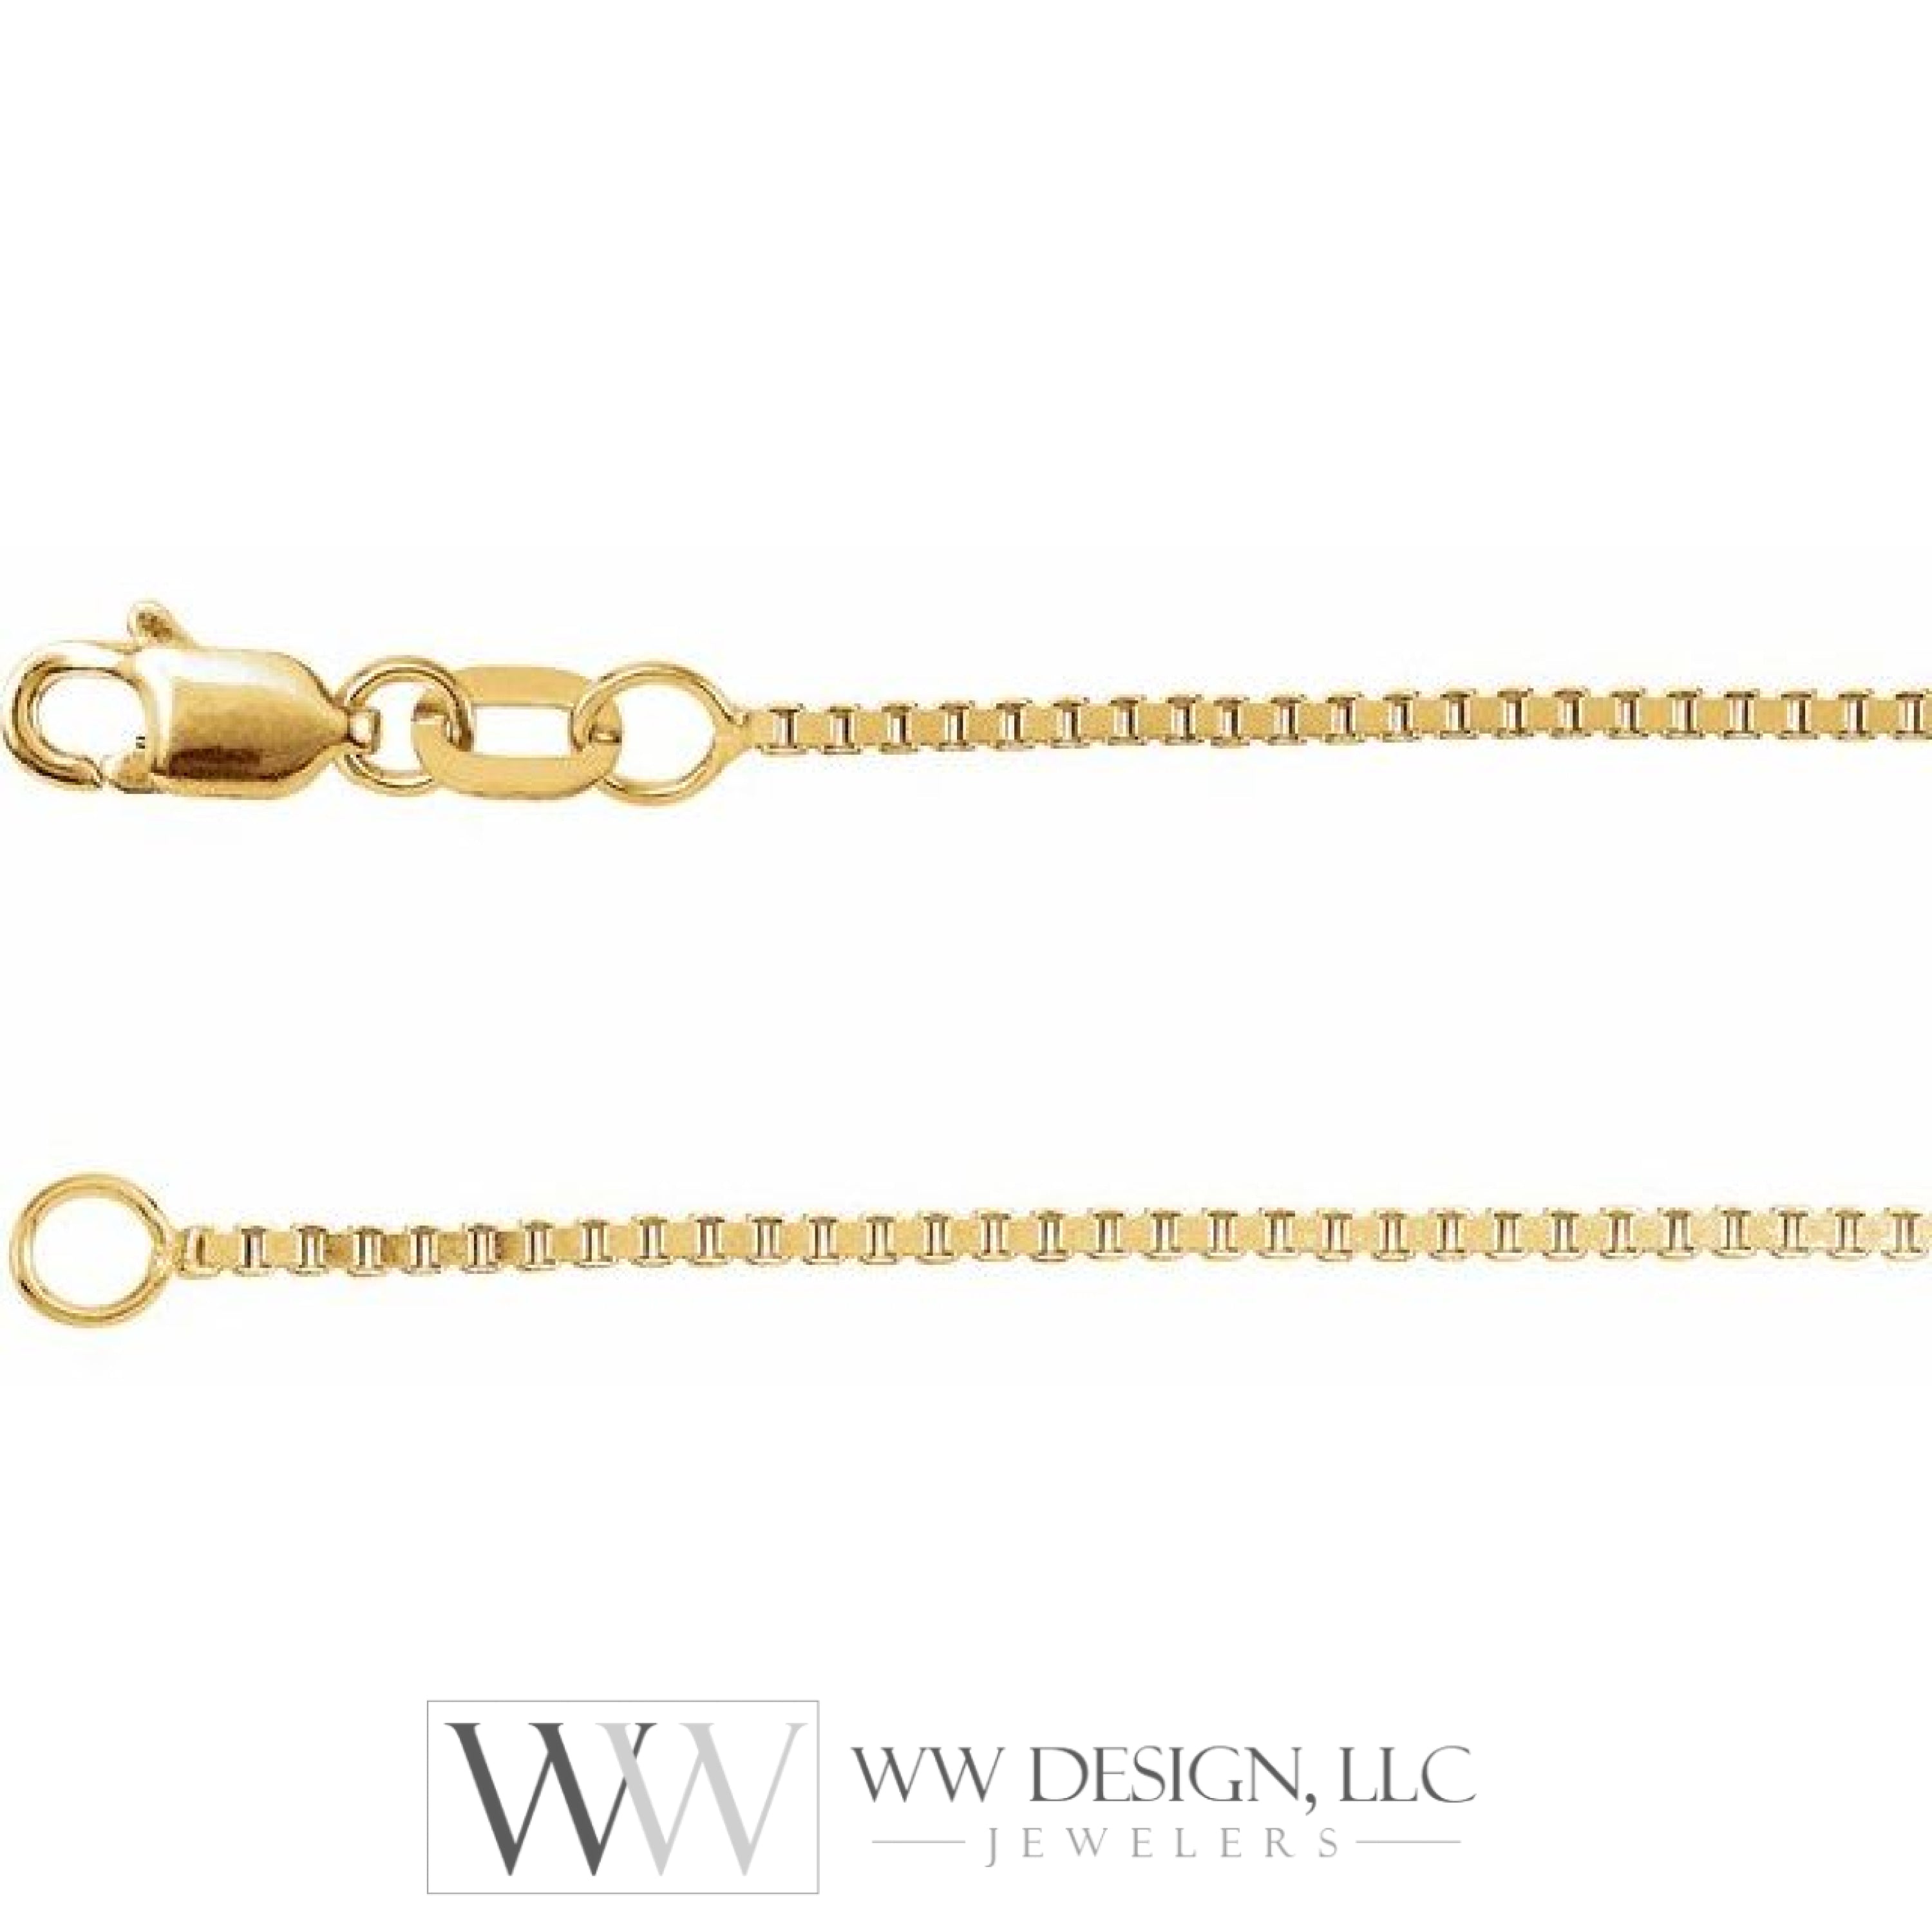 1mm Box Chain Bracelet or Necklace - 14k Gold (Y, W), or Sterling Silver